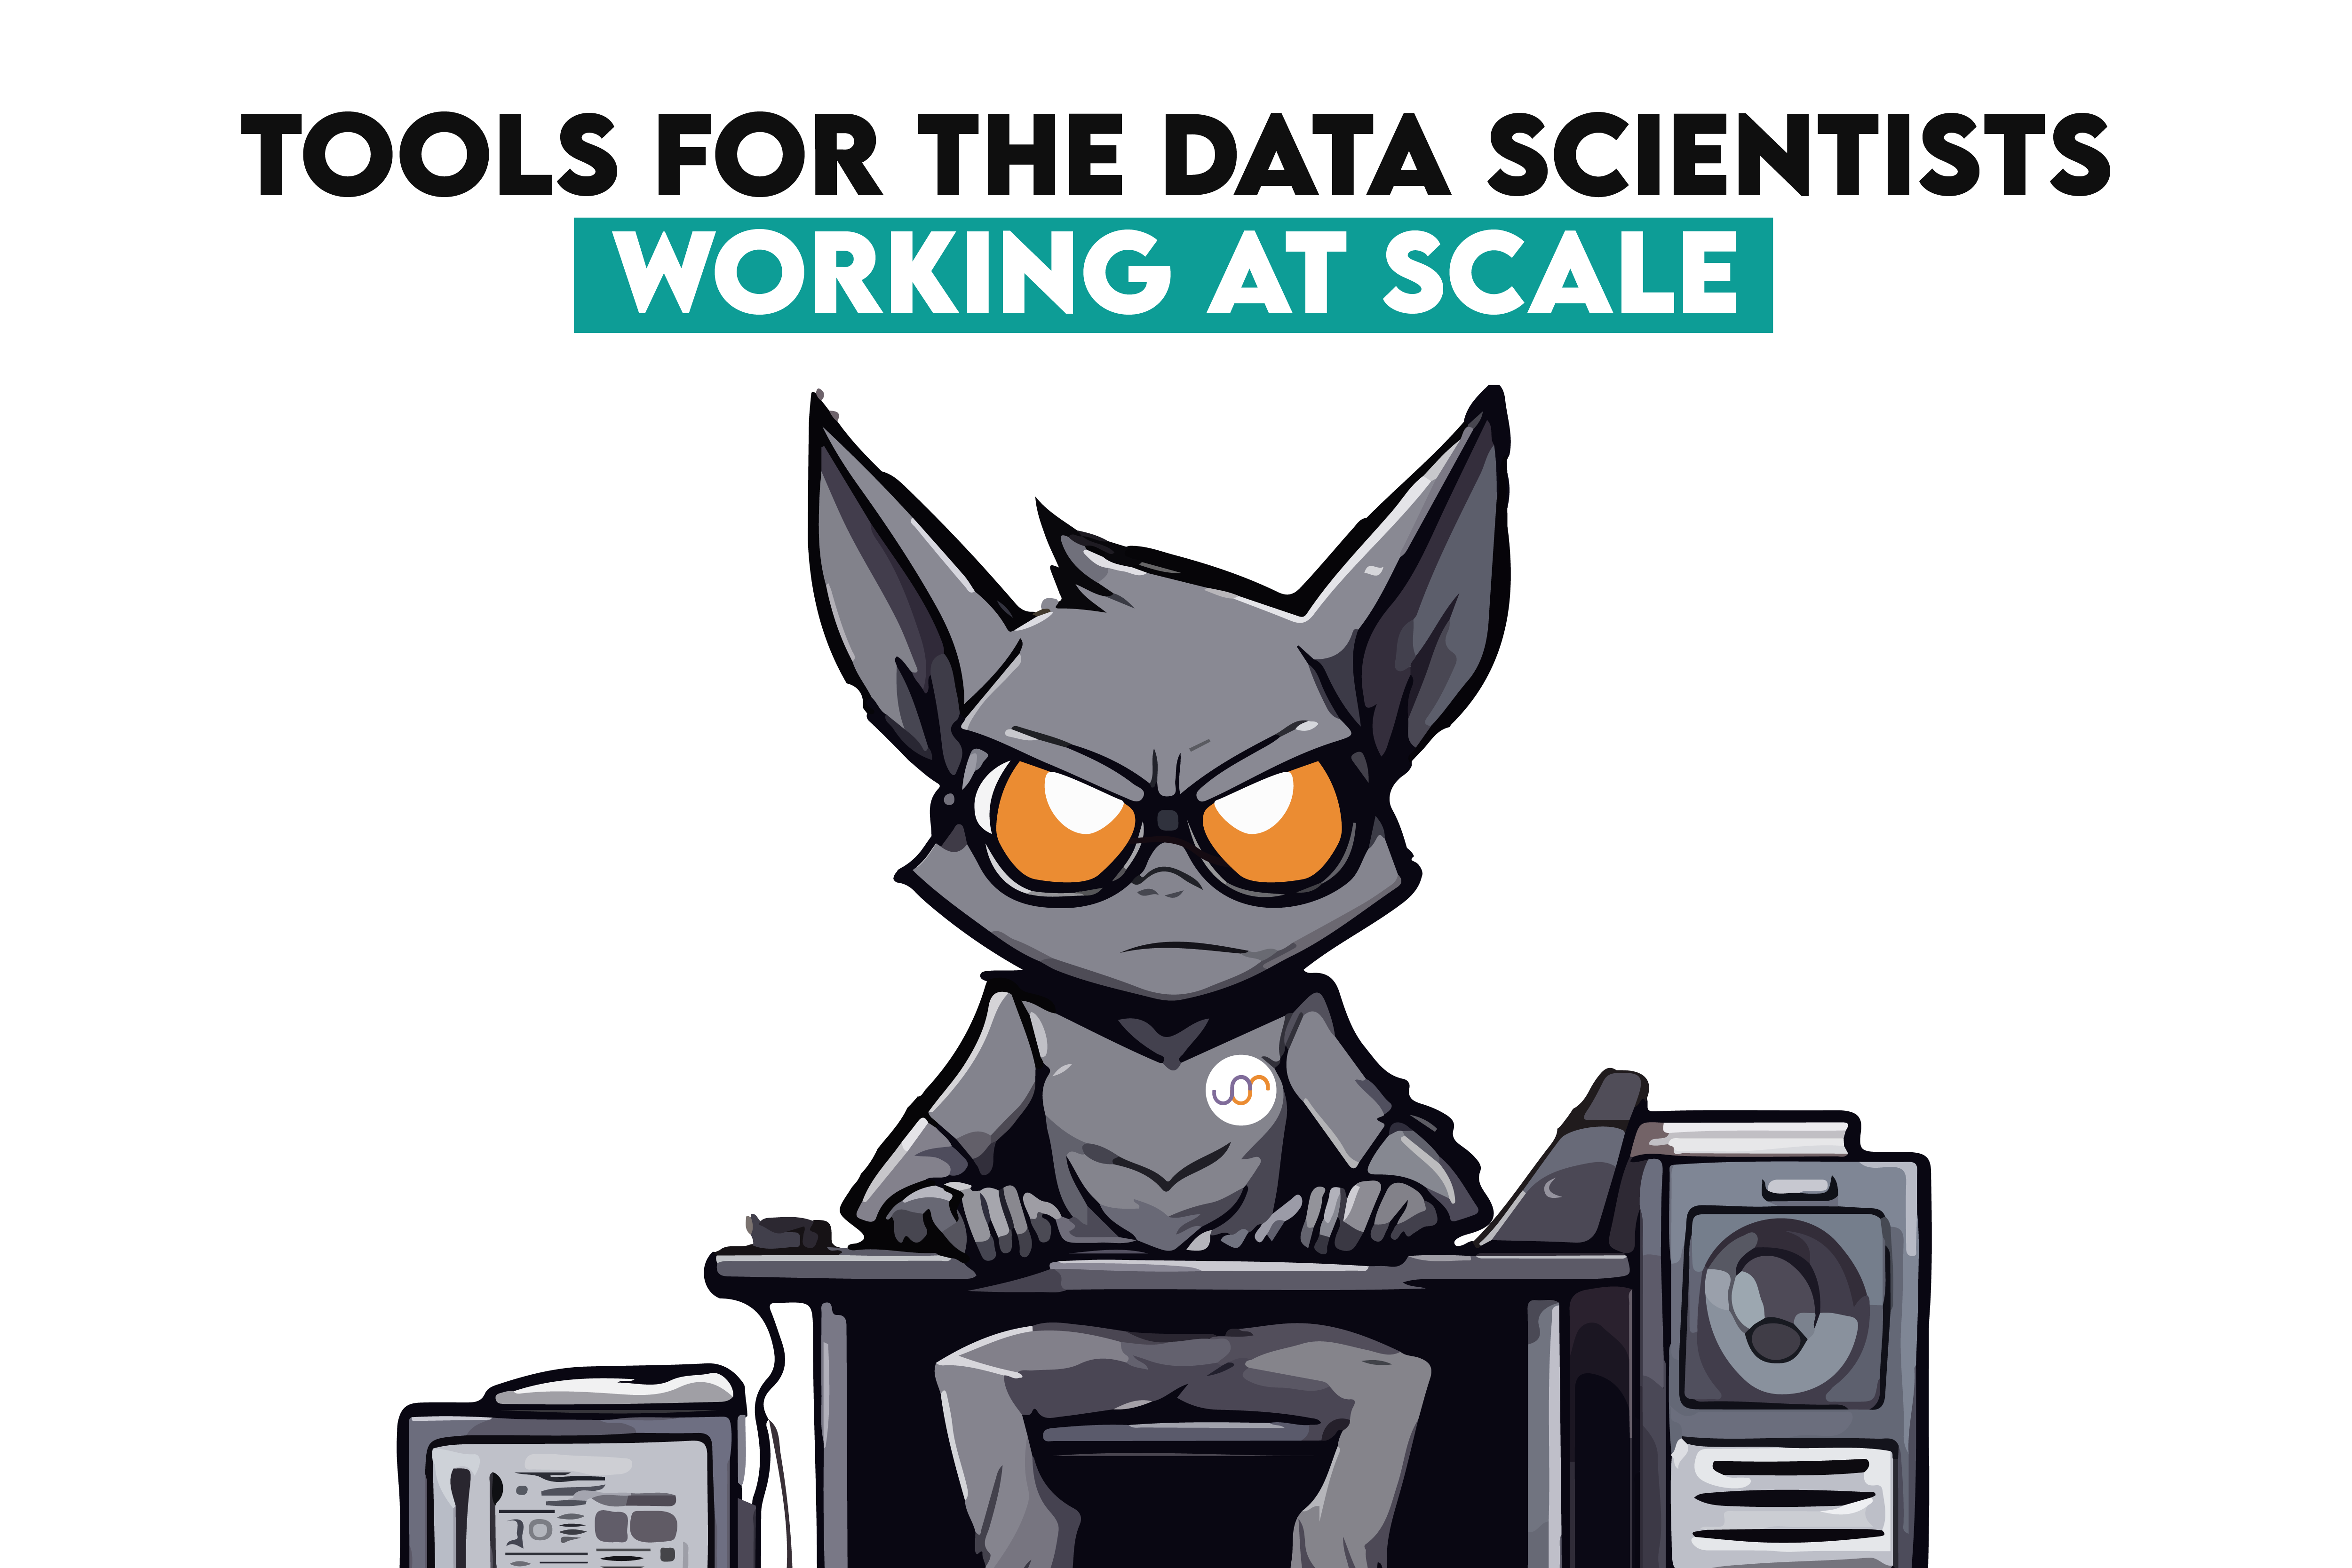 Tools for the Data Scientists Working at Scale